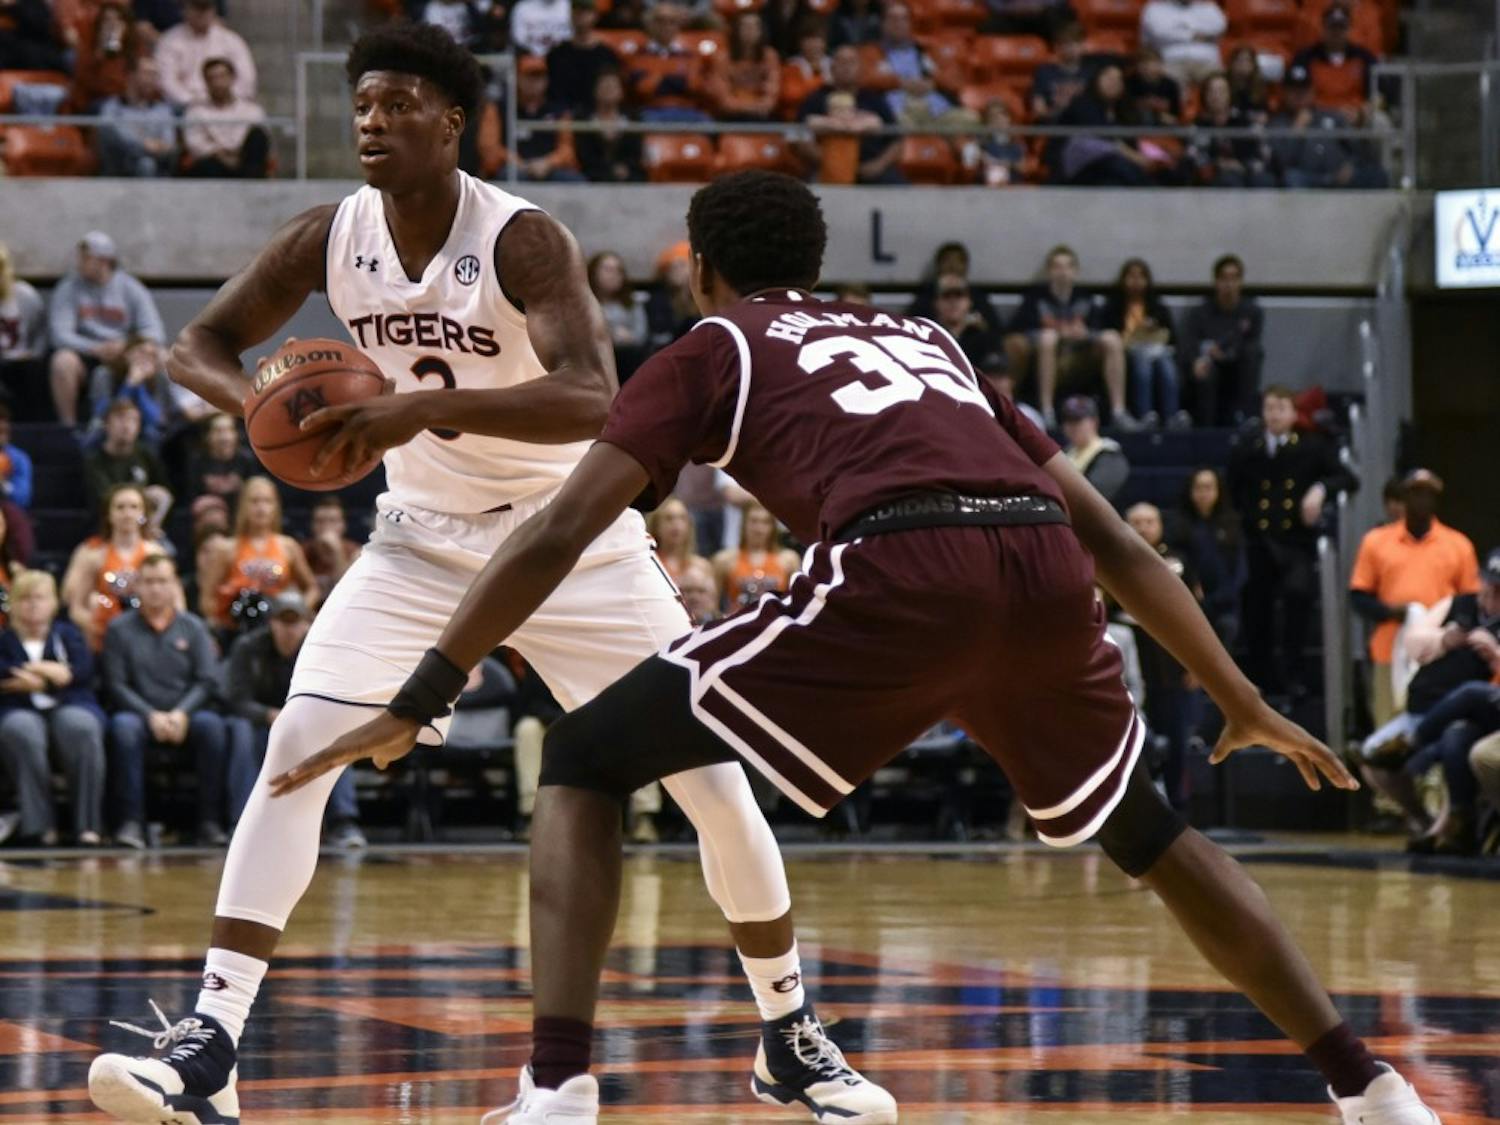 Auburn Tigers forward Danjel Purifoy (3) squares off against Mississippi State Bulldogs forward Aric Holman (35) during the first half of the Auburn vs Mississippi State basketball on Tuesday, Feb. 7, 2017, in Auburn, Ala.